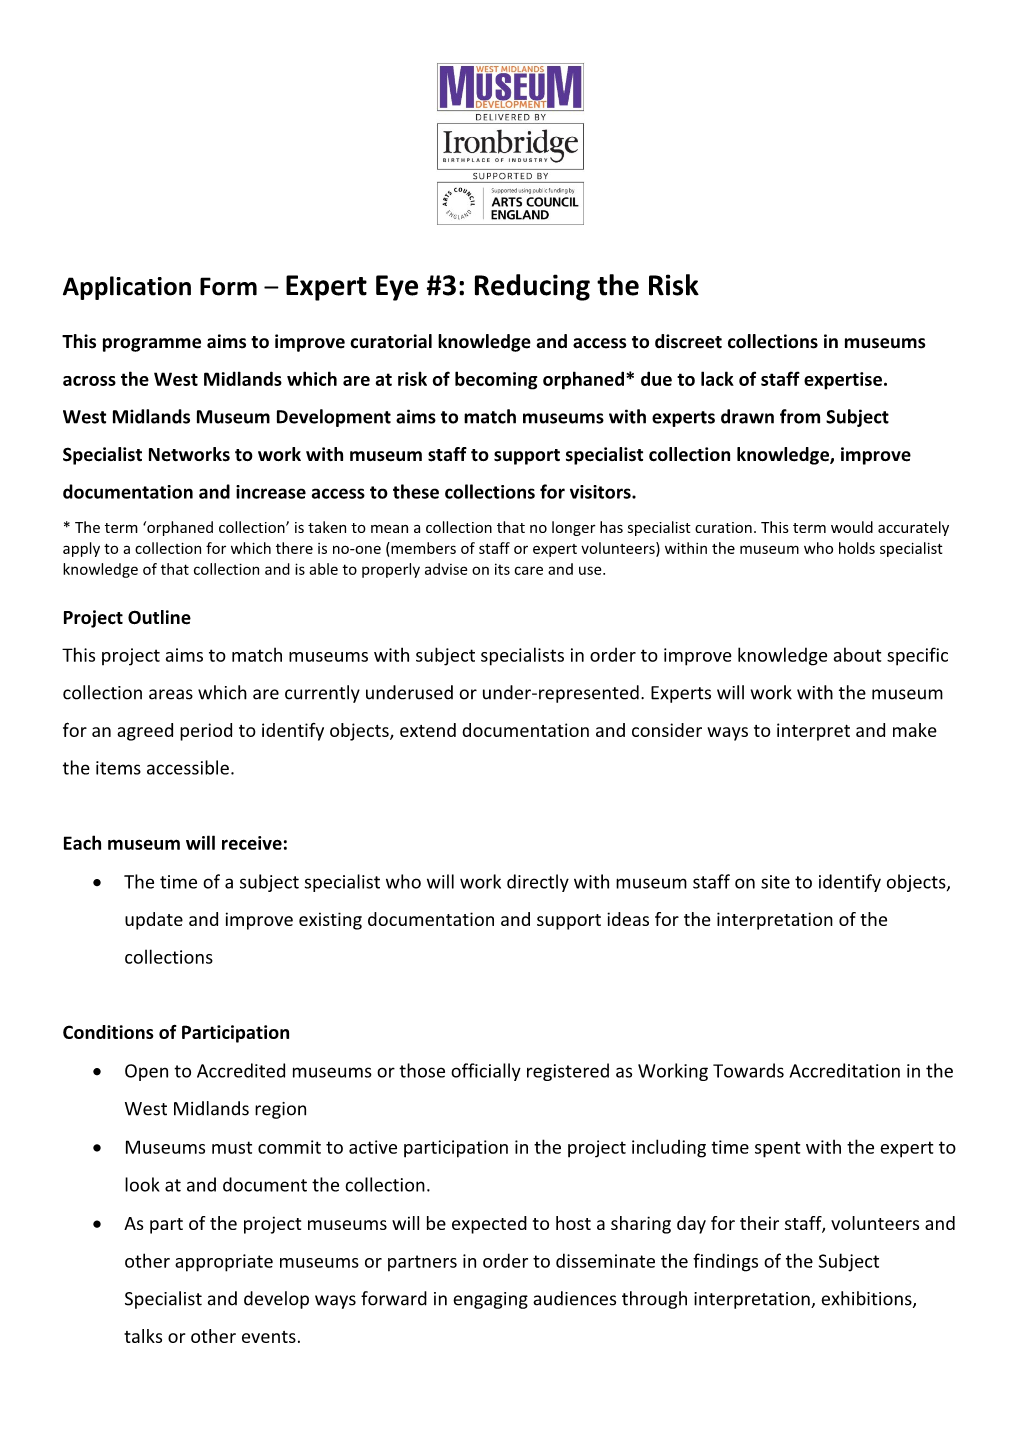 Application Form Expert Eye #3: Reducing the Risk